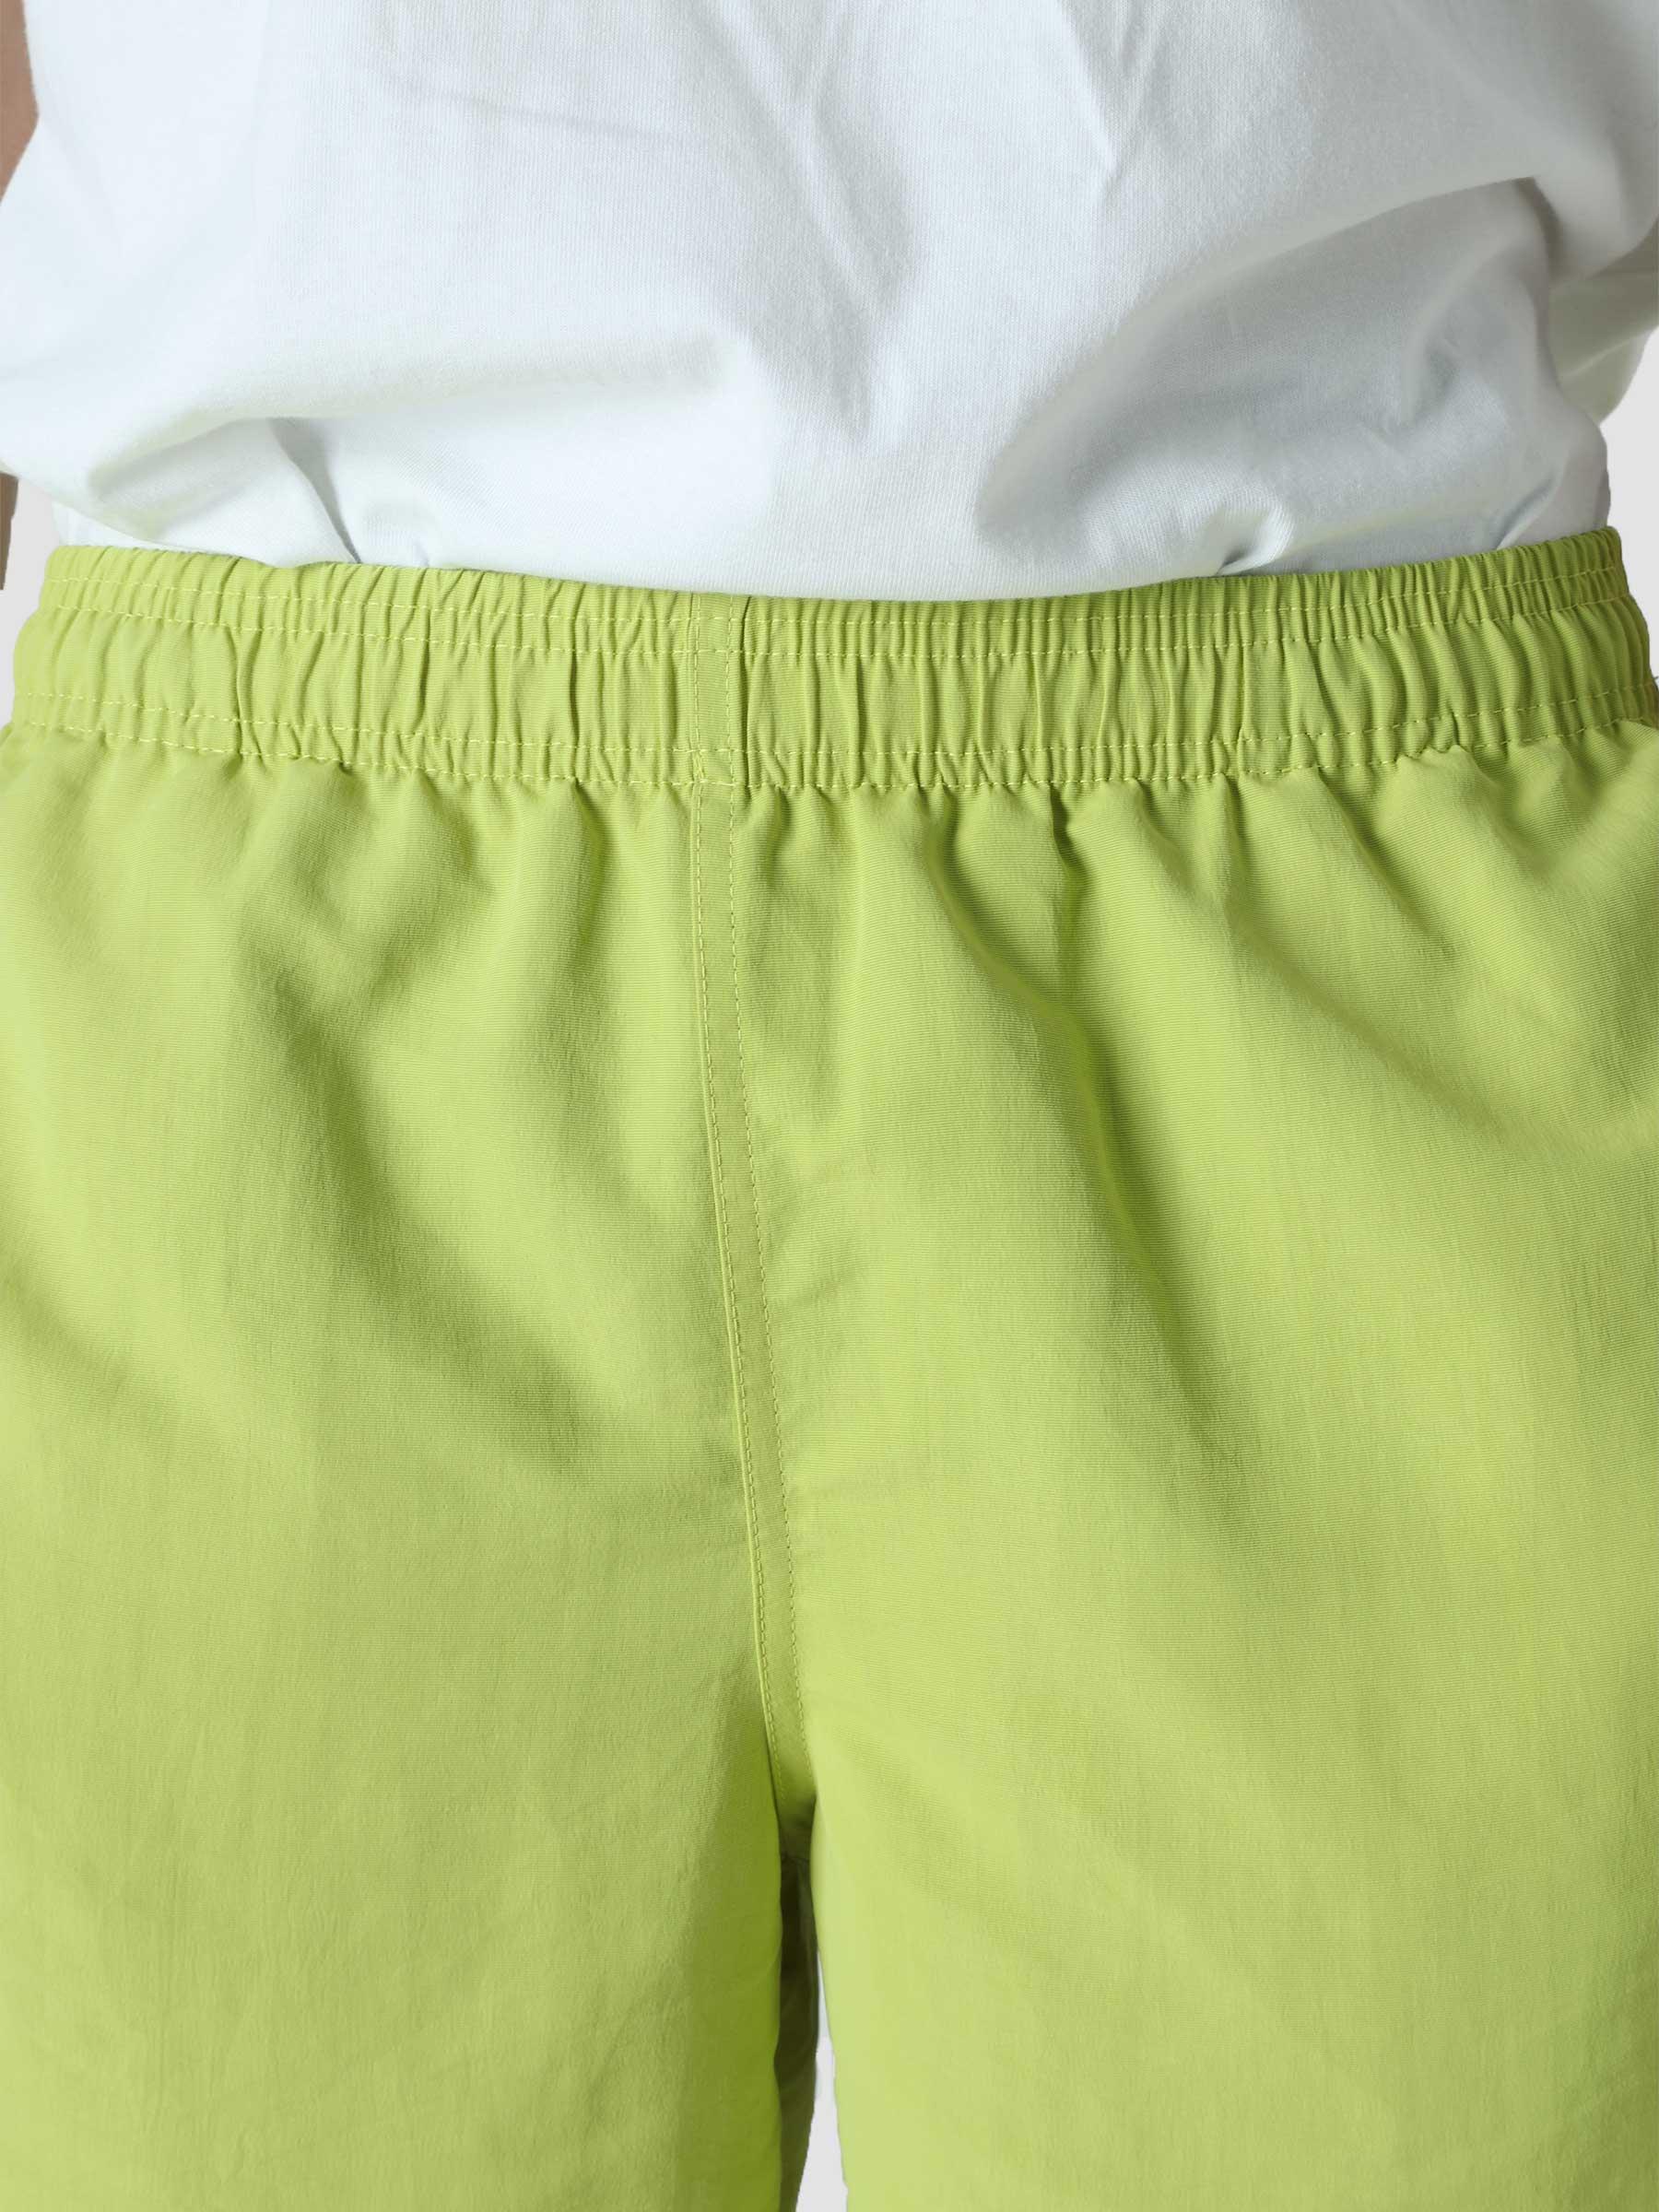 Stock Water Short Lime 113129